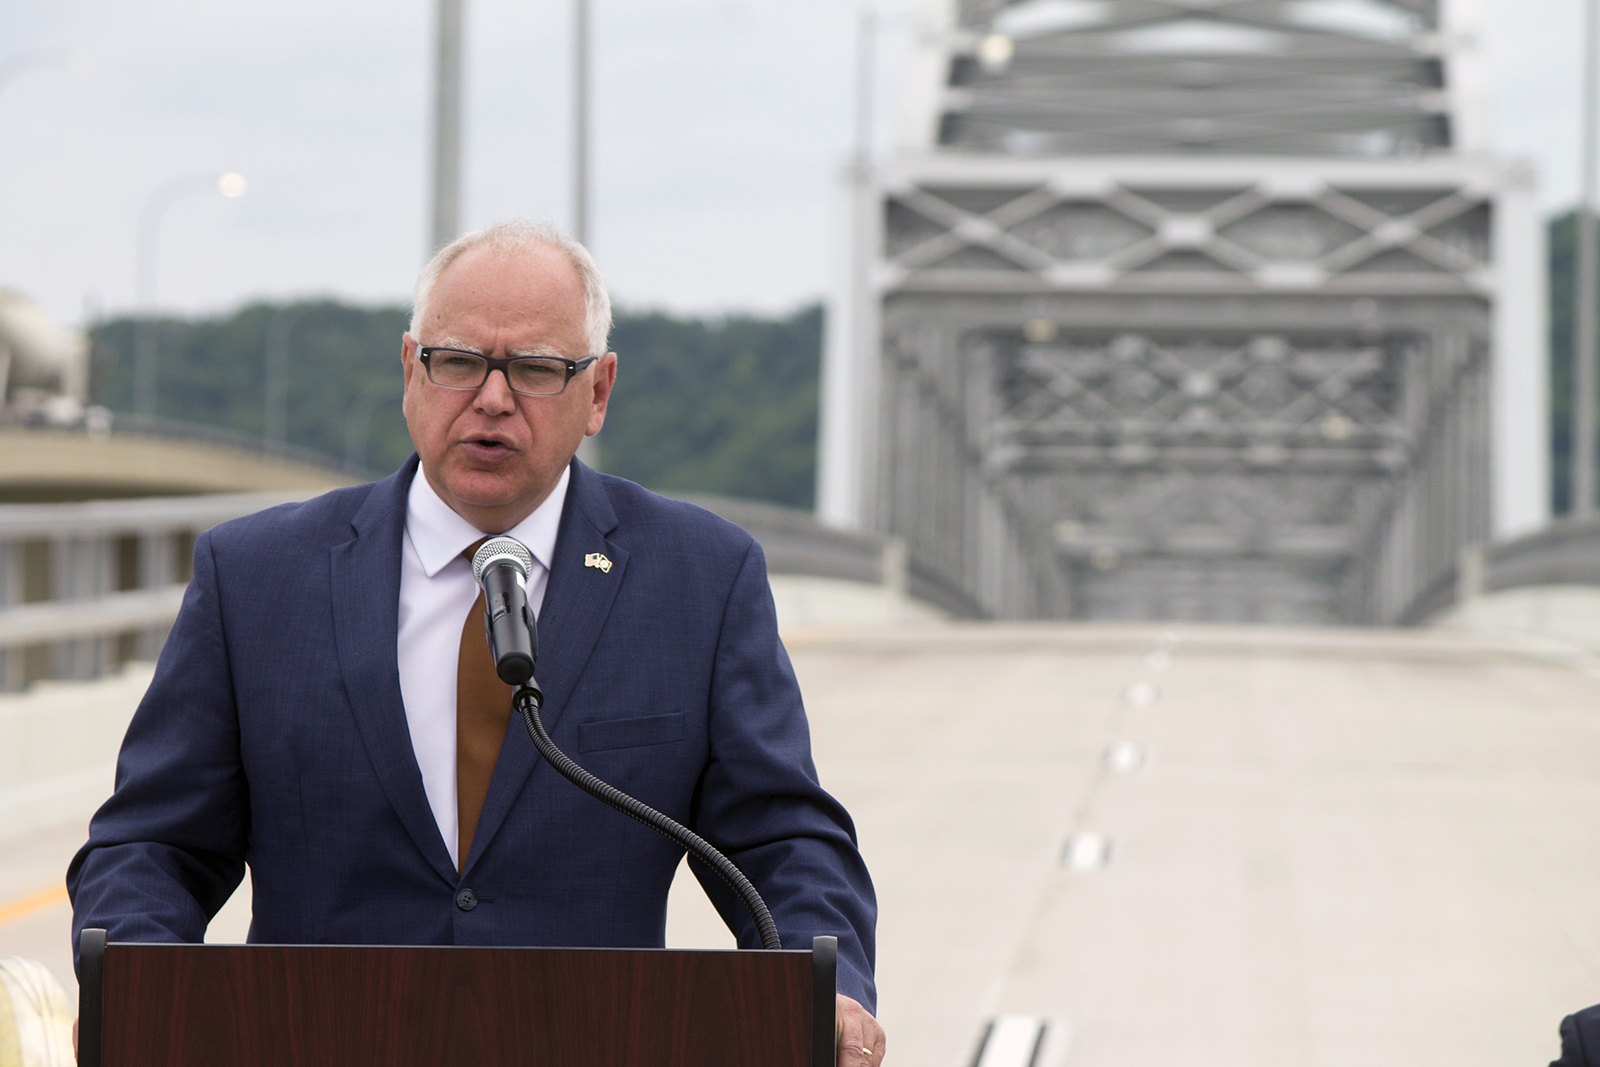 Minnesota governor Tim Walz speaking at a podium with the bridge in the background